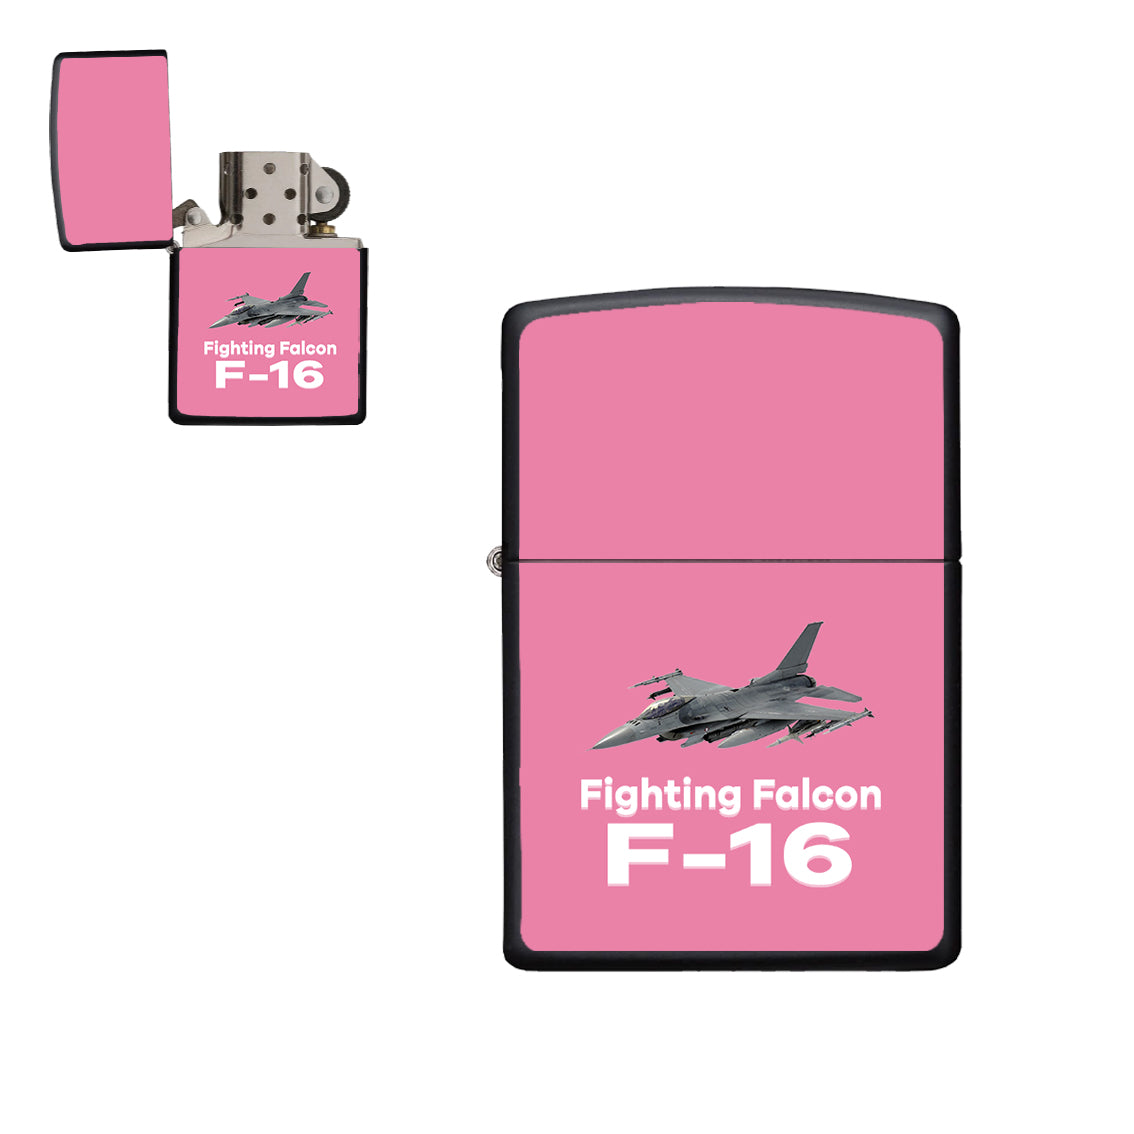 The Fighting Falcon F16 Designed Metal Lighters